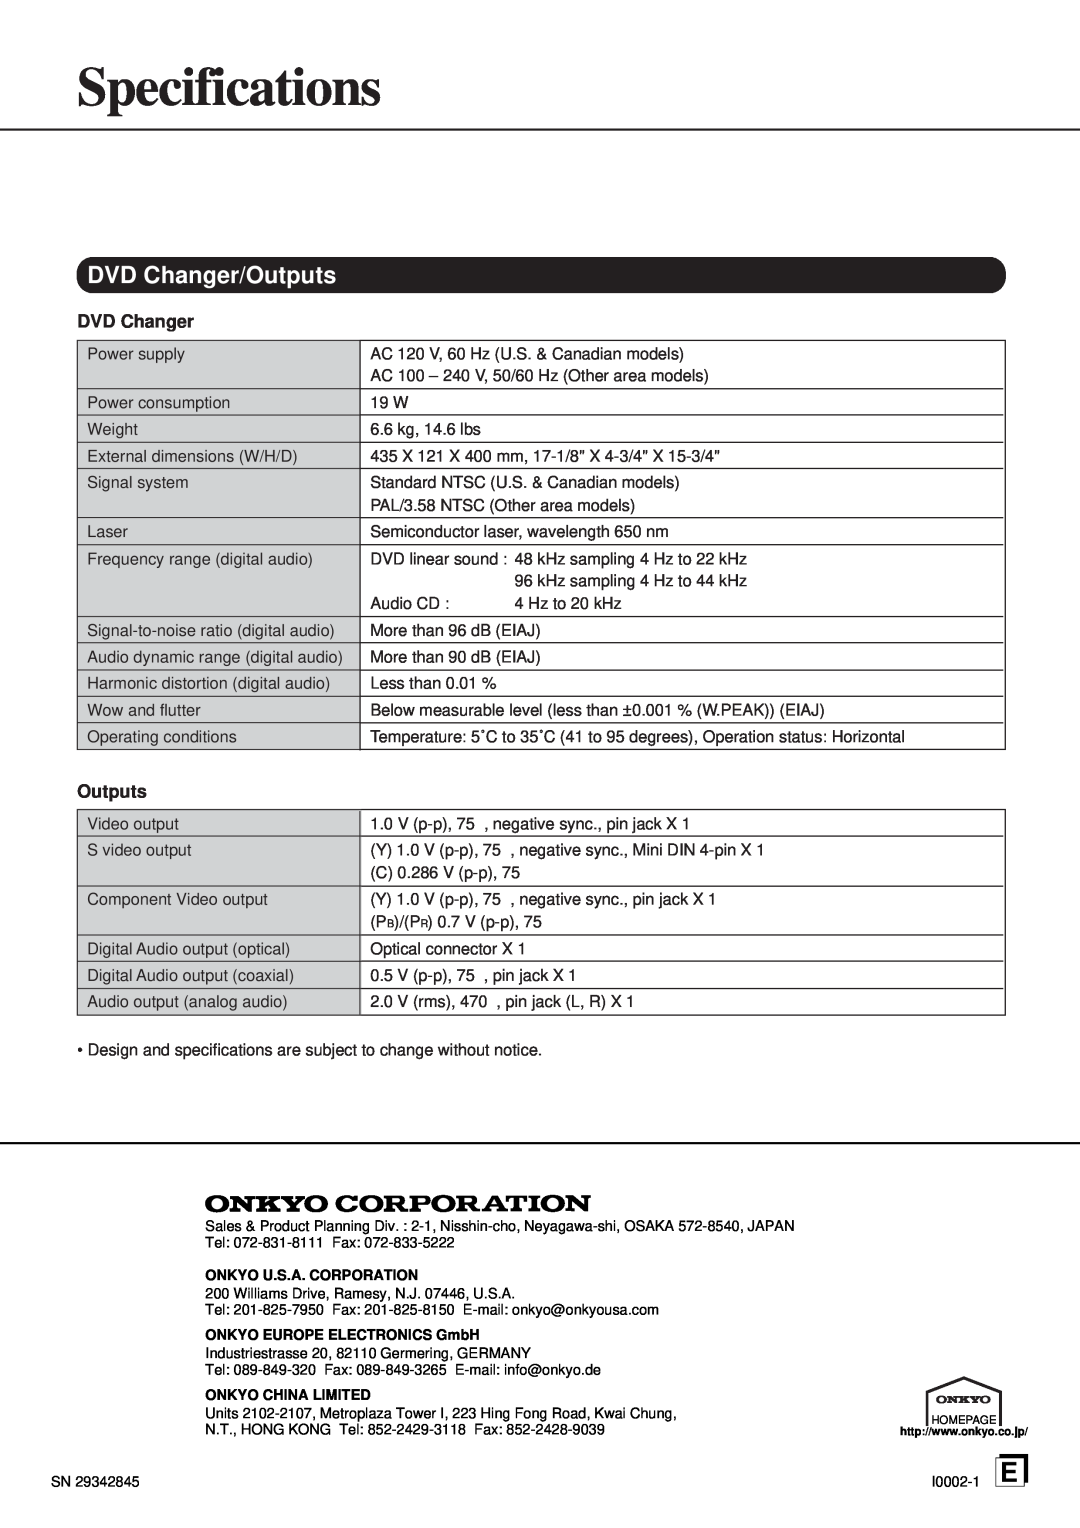 Onkyo DV-C501 instruction manual Specifications, DVD Changer, Outputs 